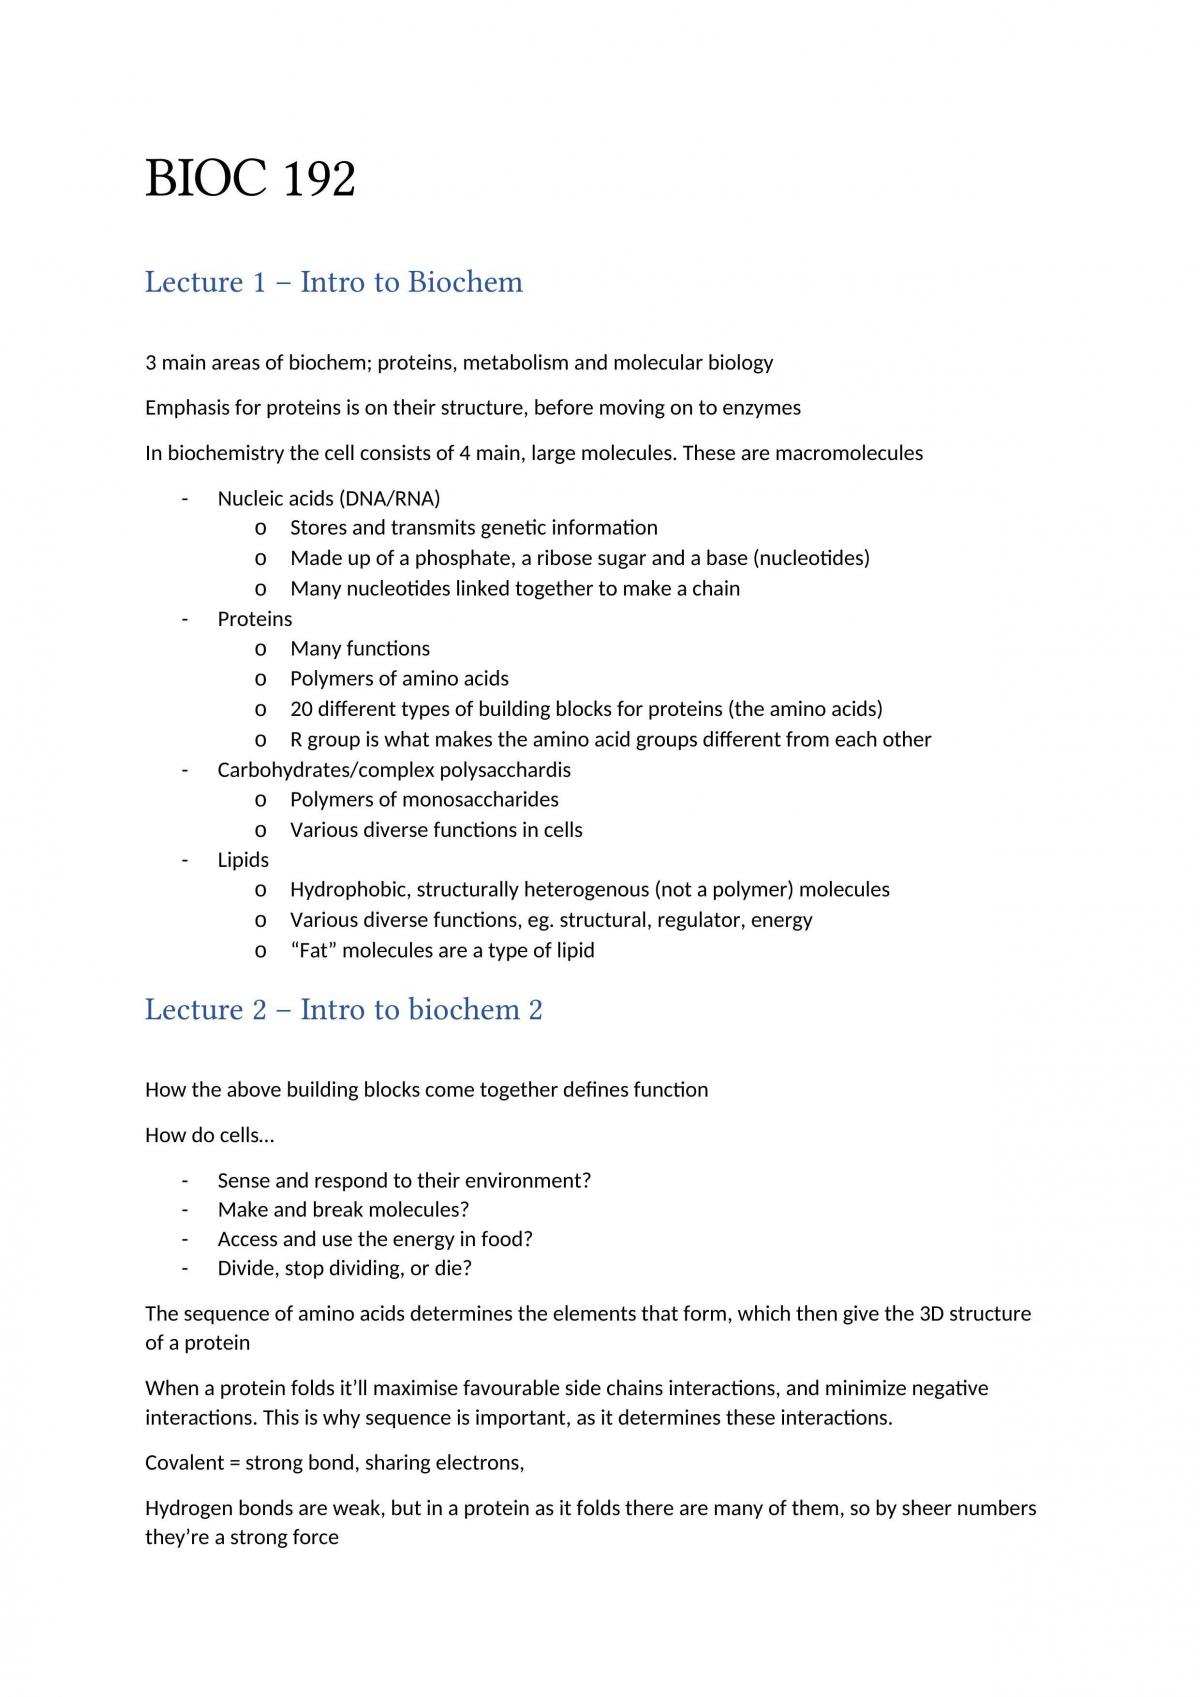 BIOC192 (Foundations of Biochemistry) complete set of notes - Page 1